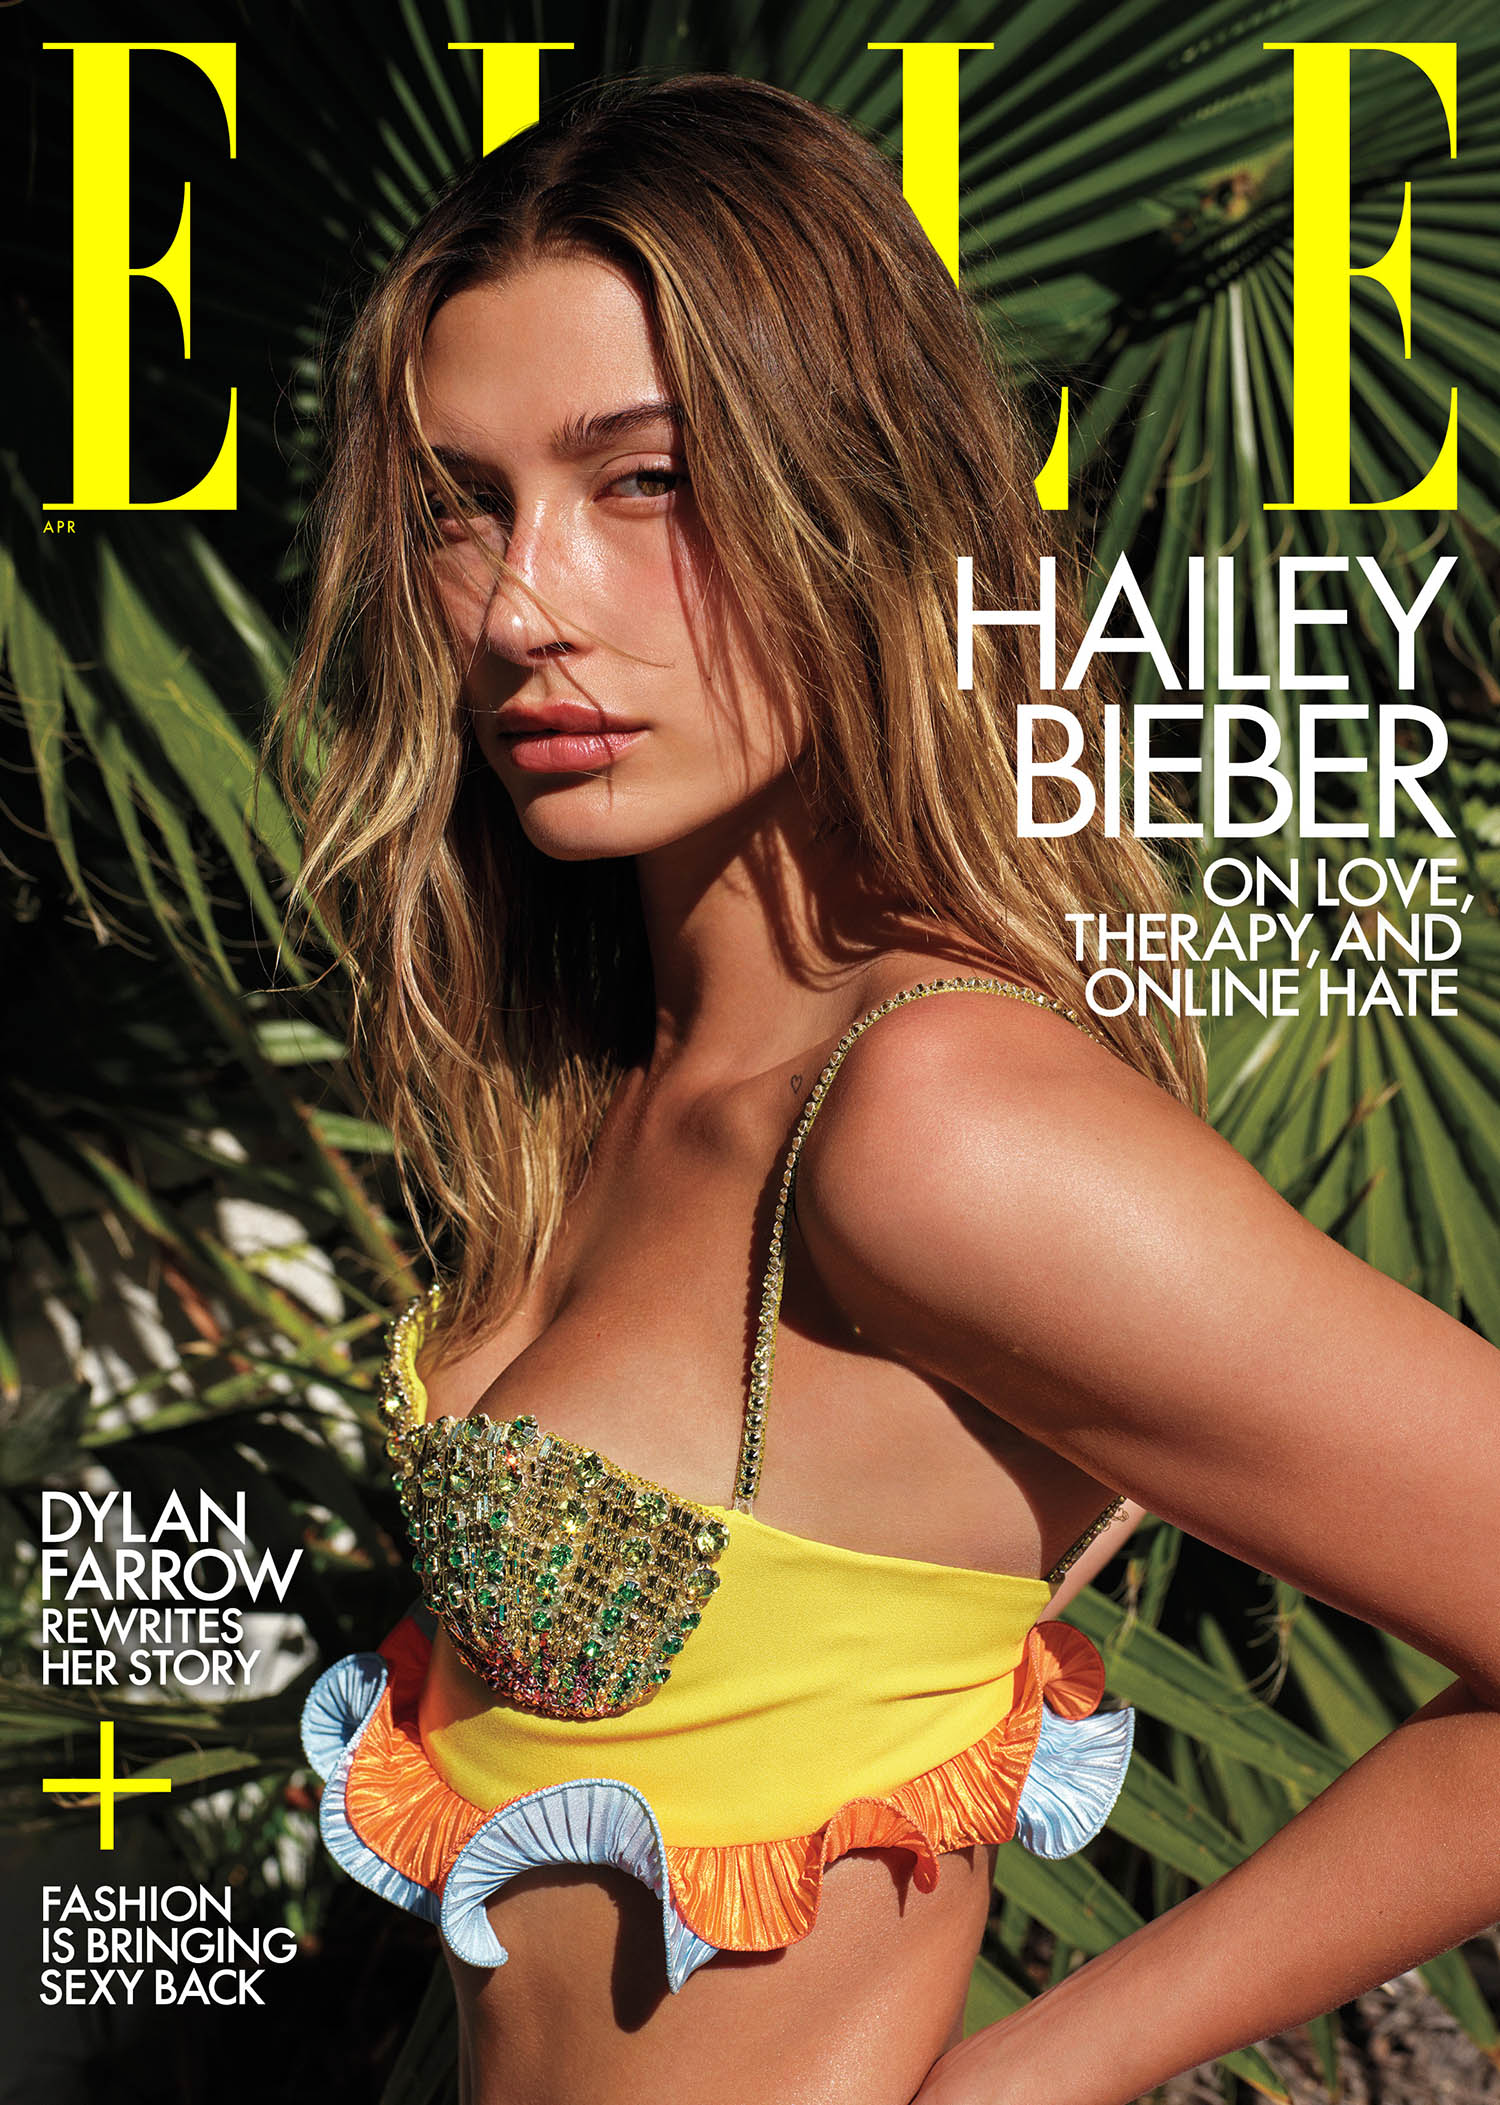 Hailey Bieber covers Elle US April 2021 by Mario Sorrenti